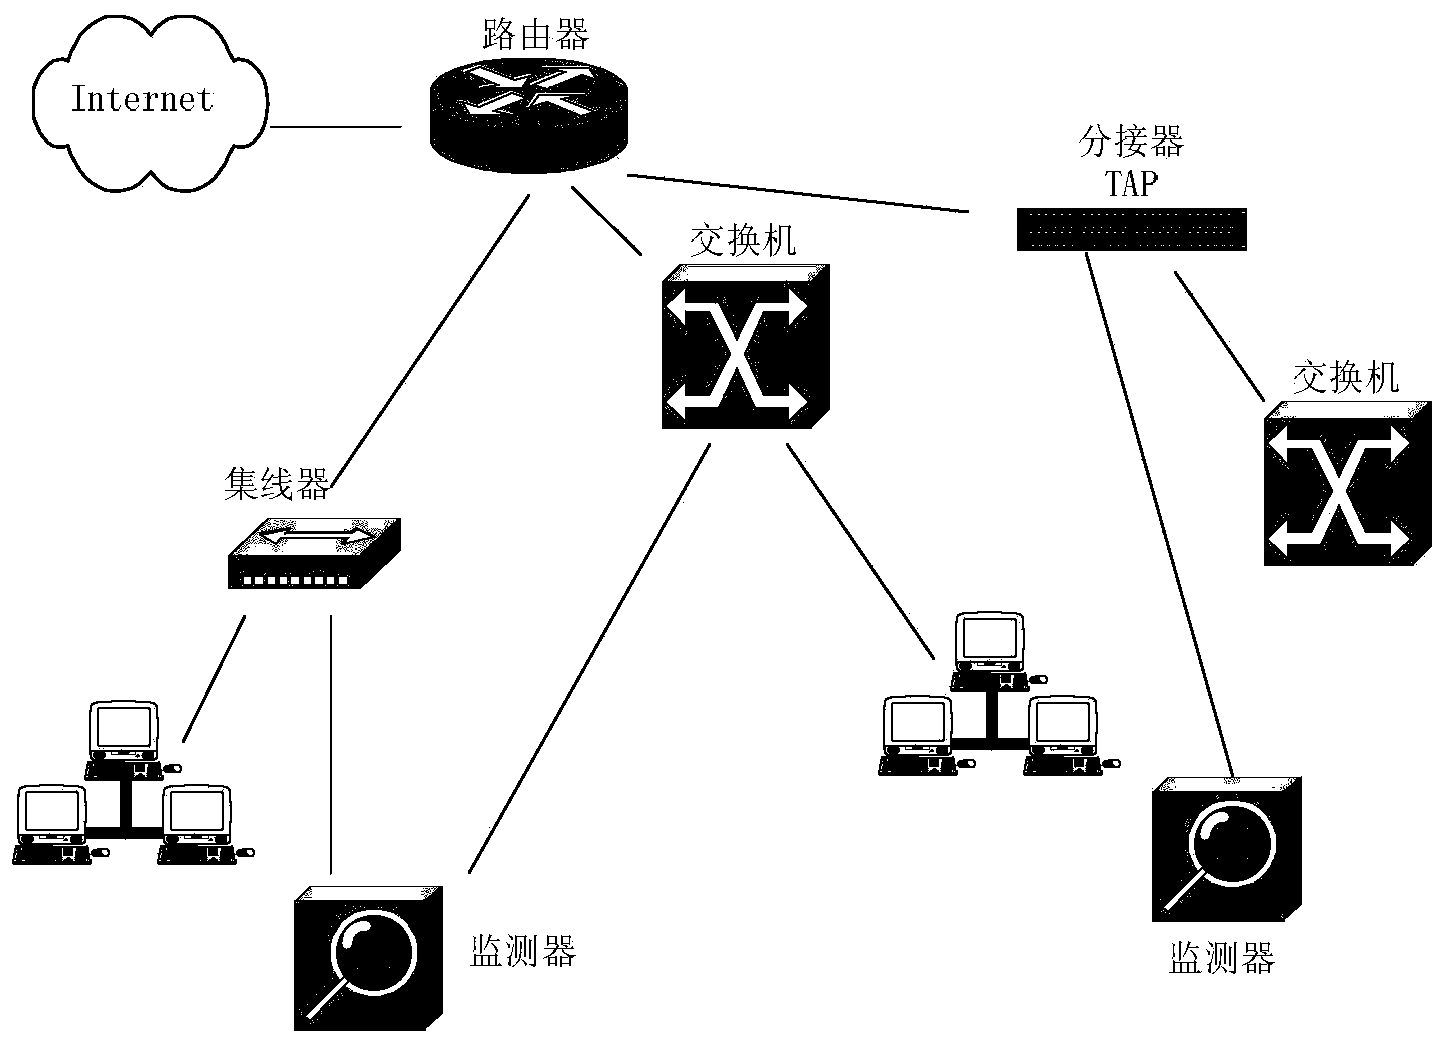 Hierarchical control and monitoring system of network traffic data